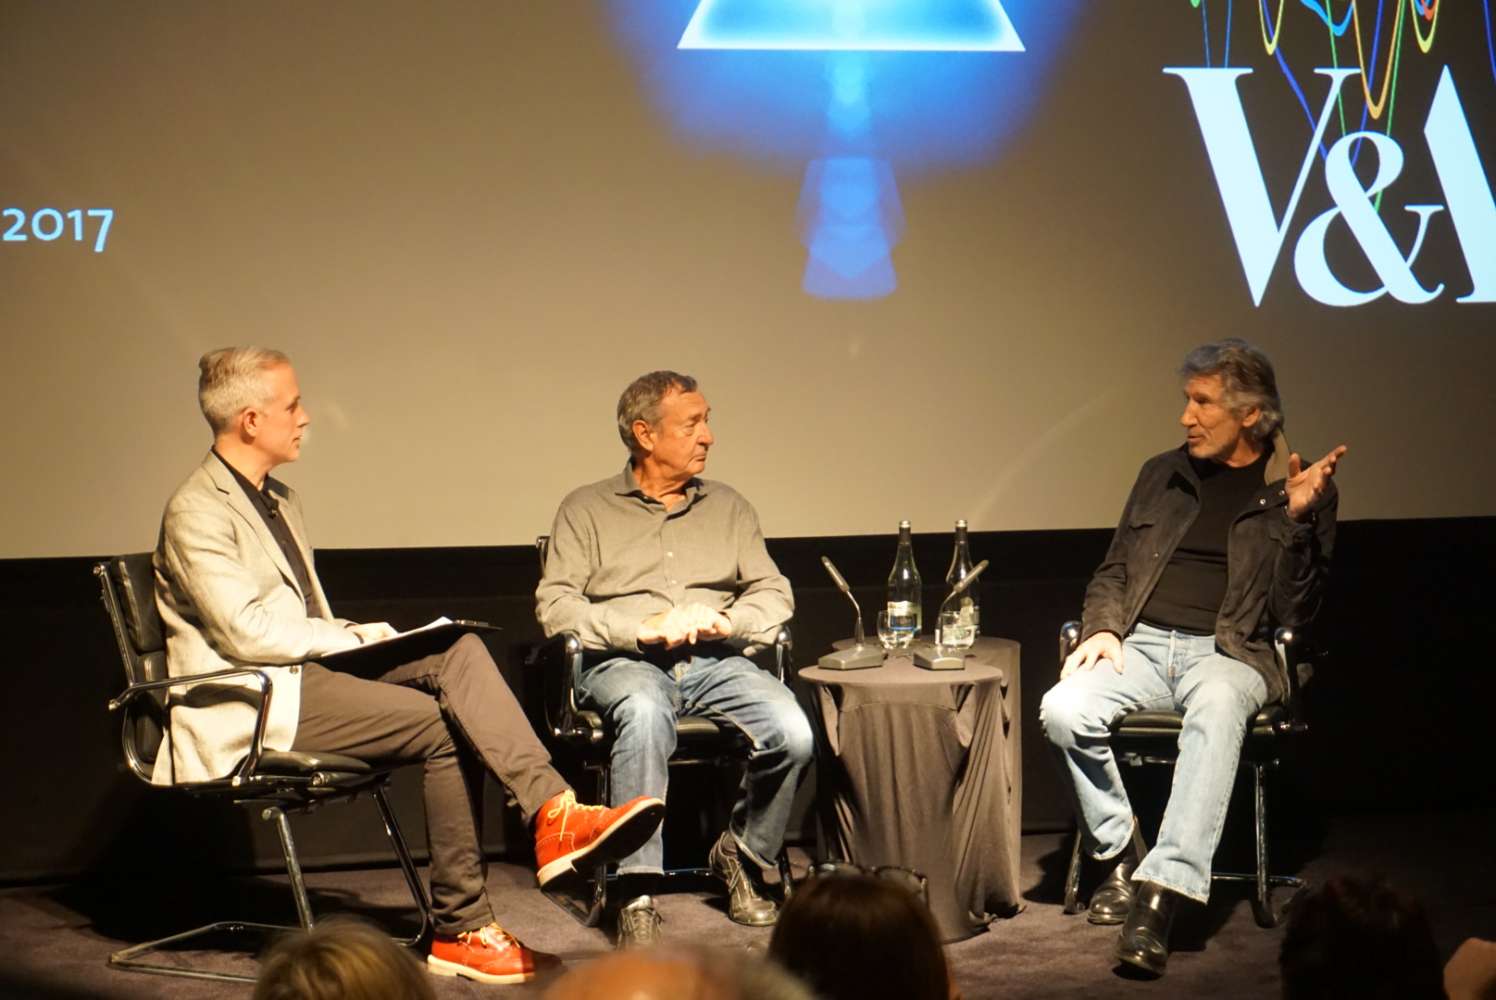 Pink Floyd's Roger Waters and Nick Mason made a rare public appearance together in London last week (photo: PLASA Media)